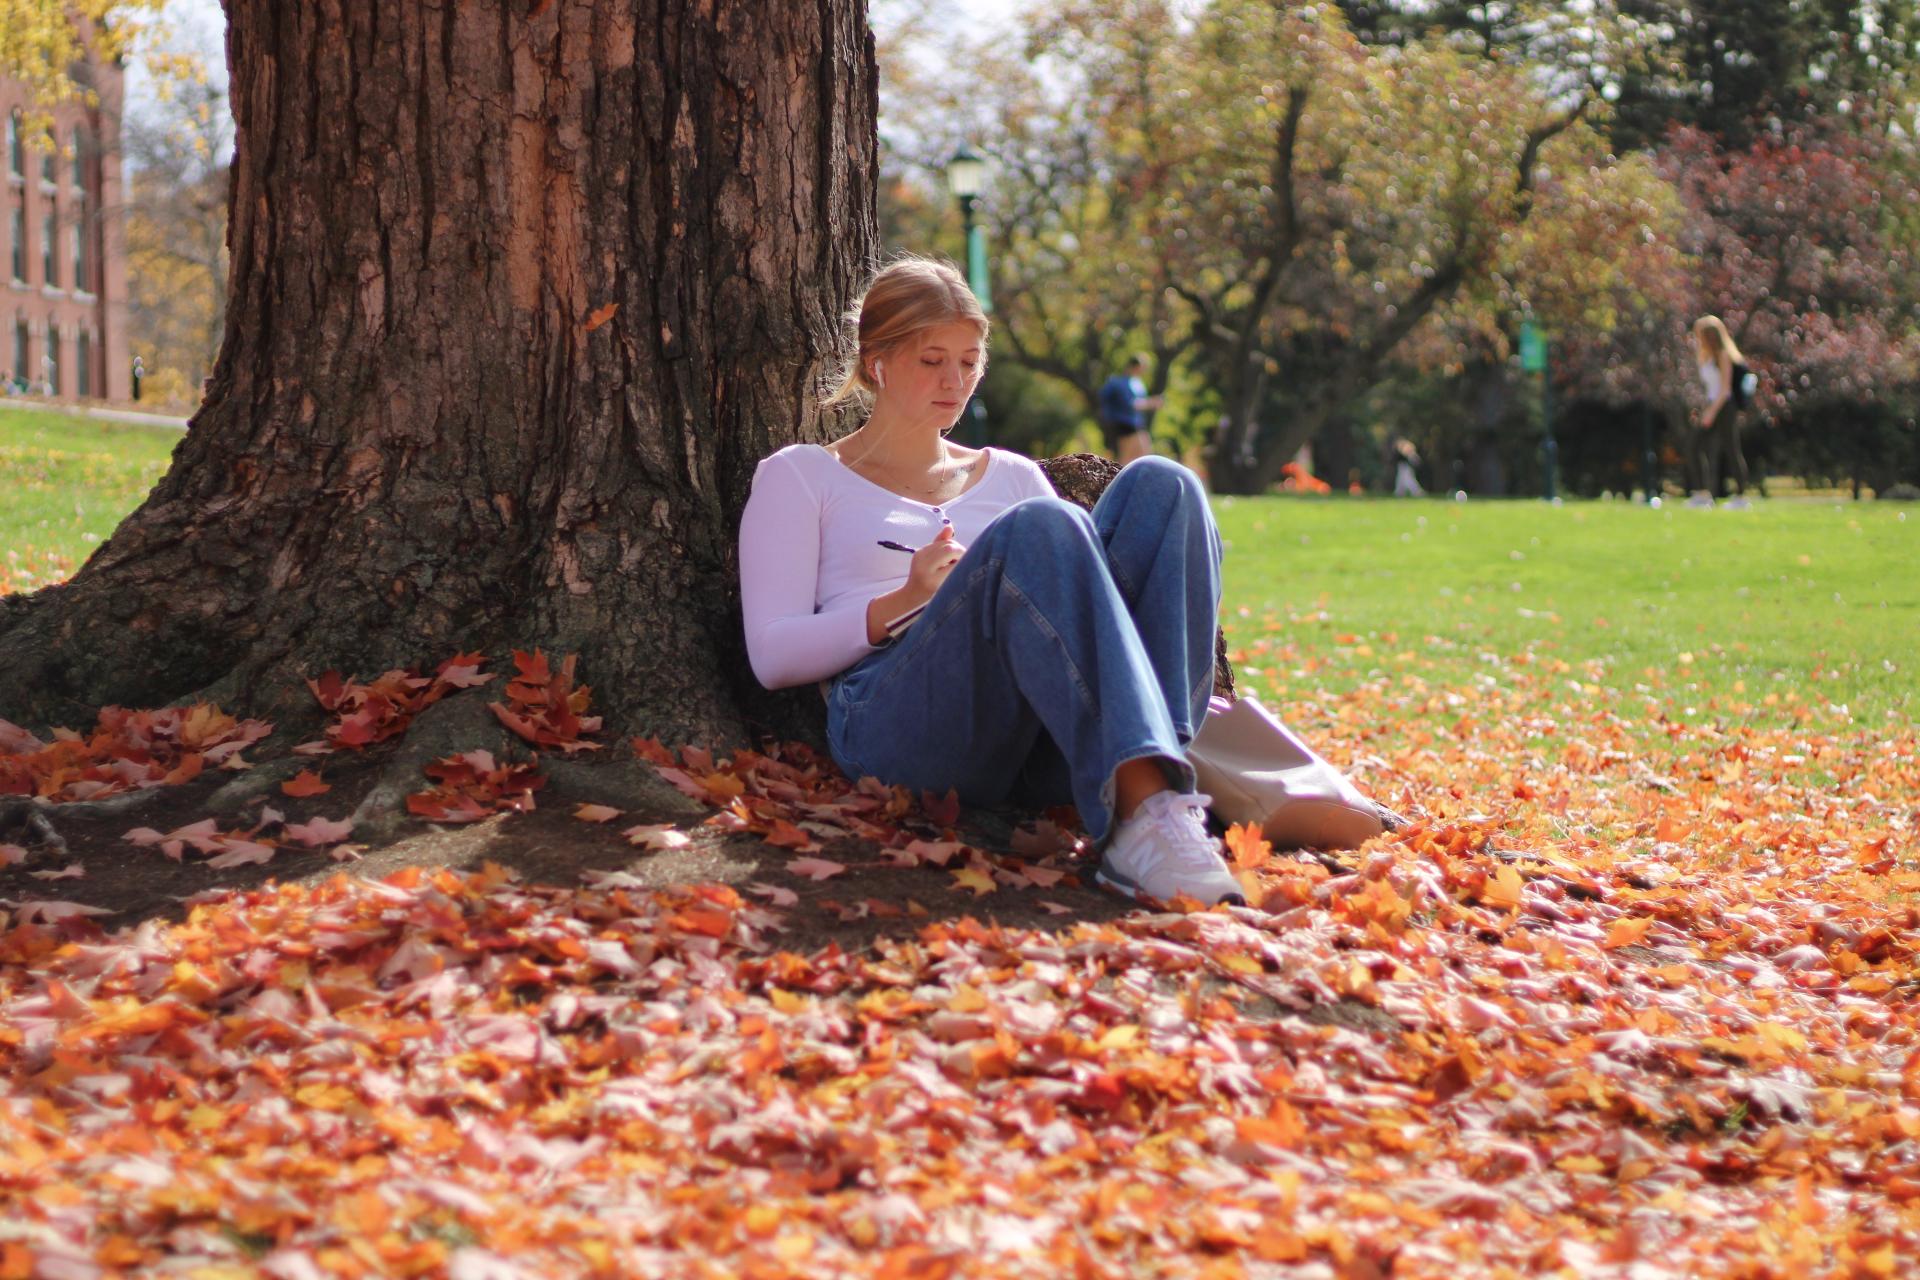 Student studies beneath a tree while sitting in orange fall leaves